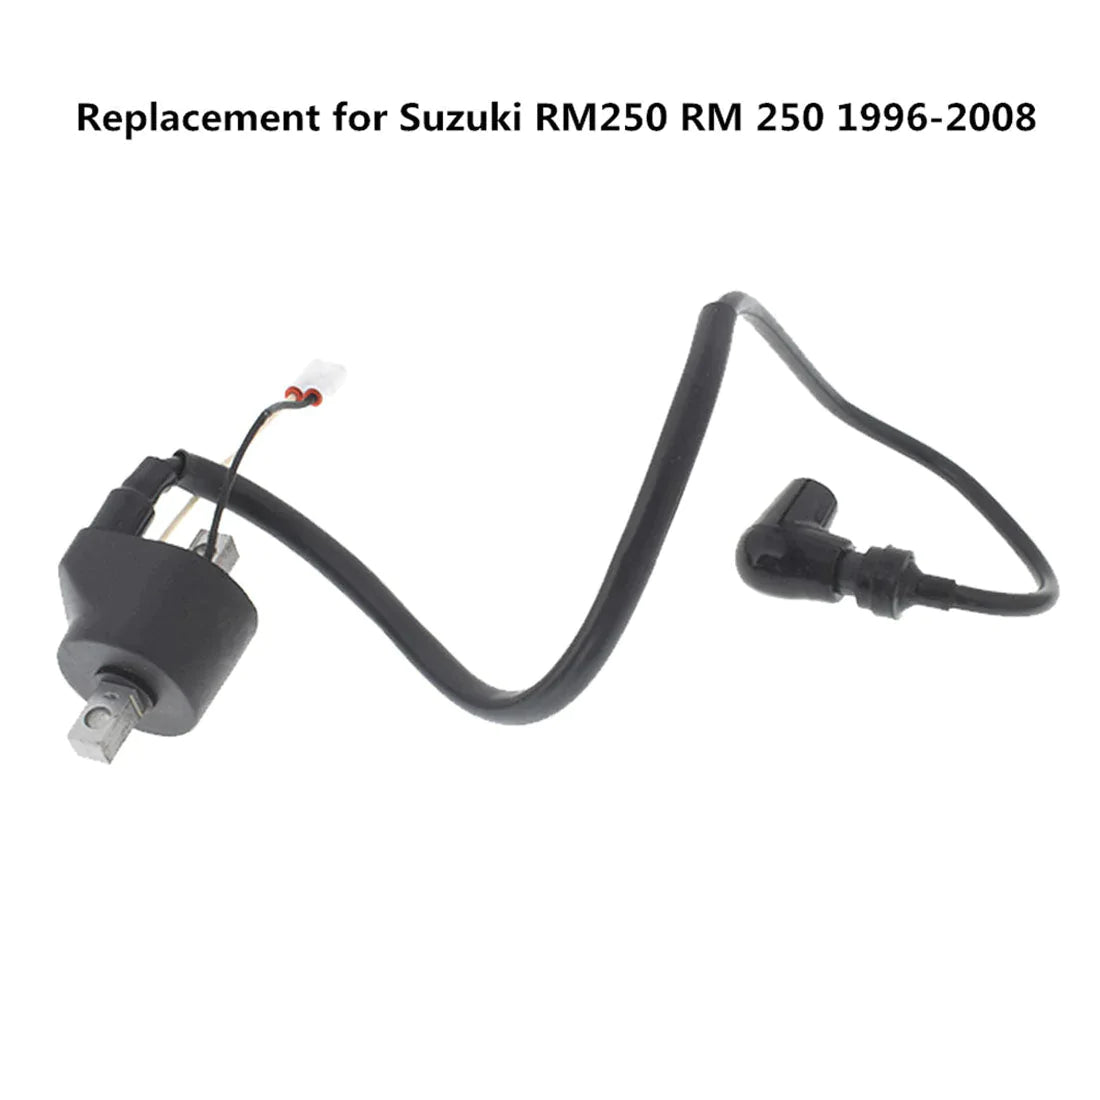 labwork Ignition Coil Replacement for Suzuki RM250 RM 250 1996-2008 LAB WORK MOTO